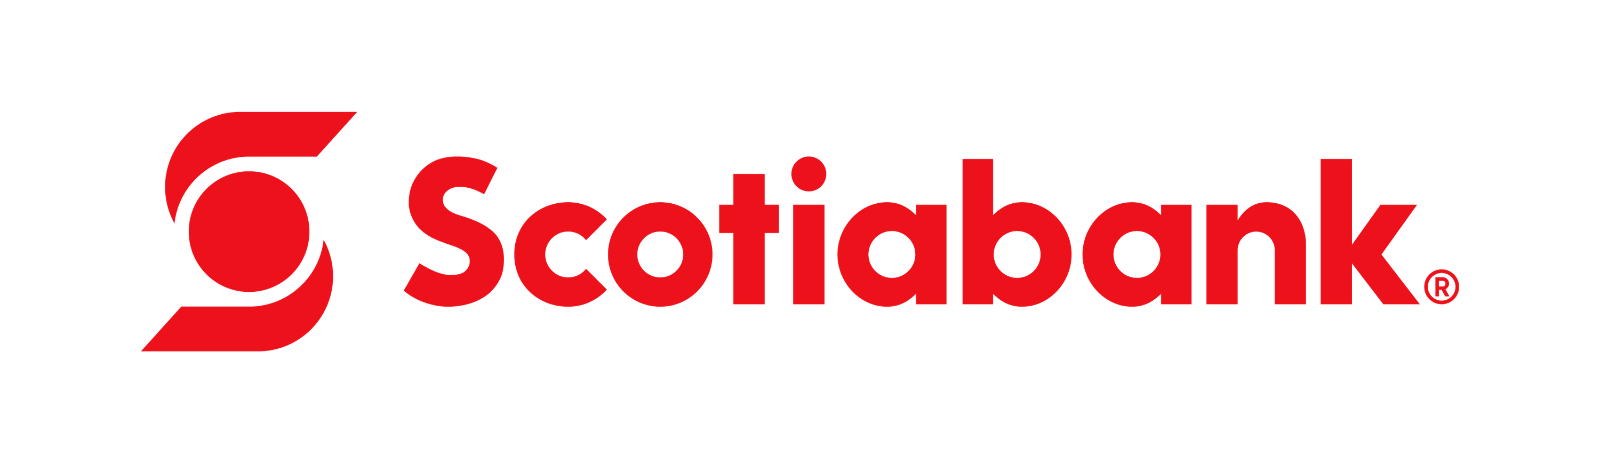 Soctiabank logo bolded in red an